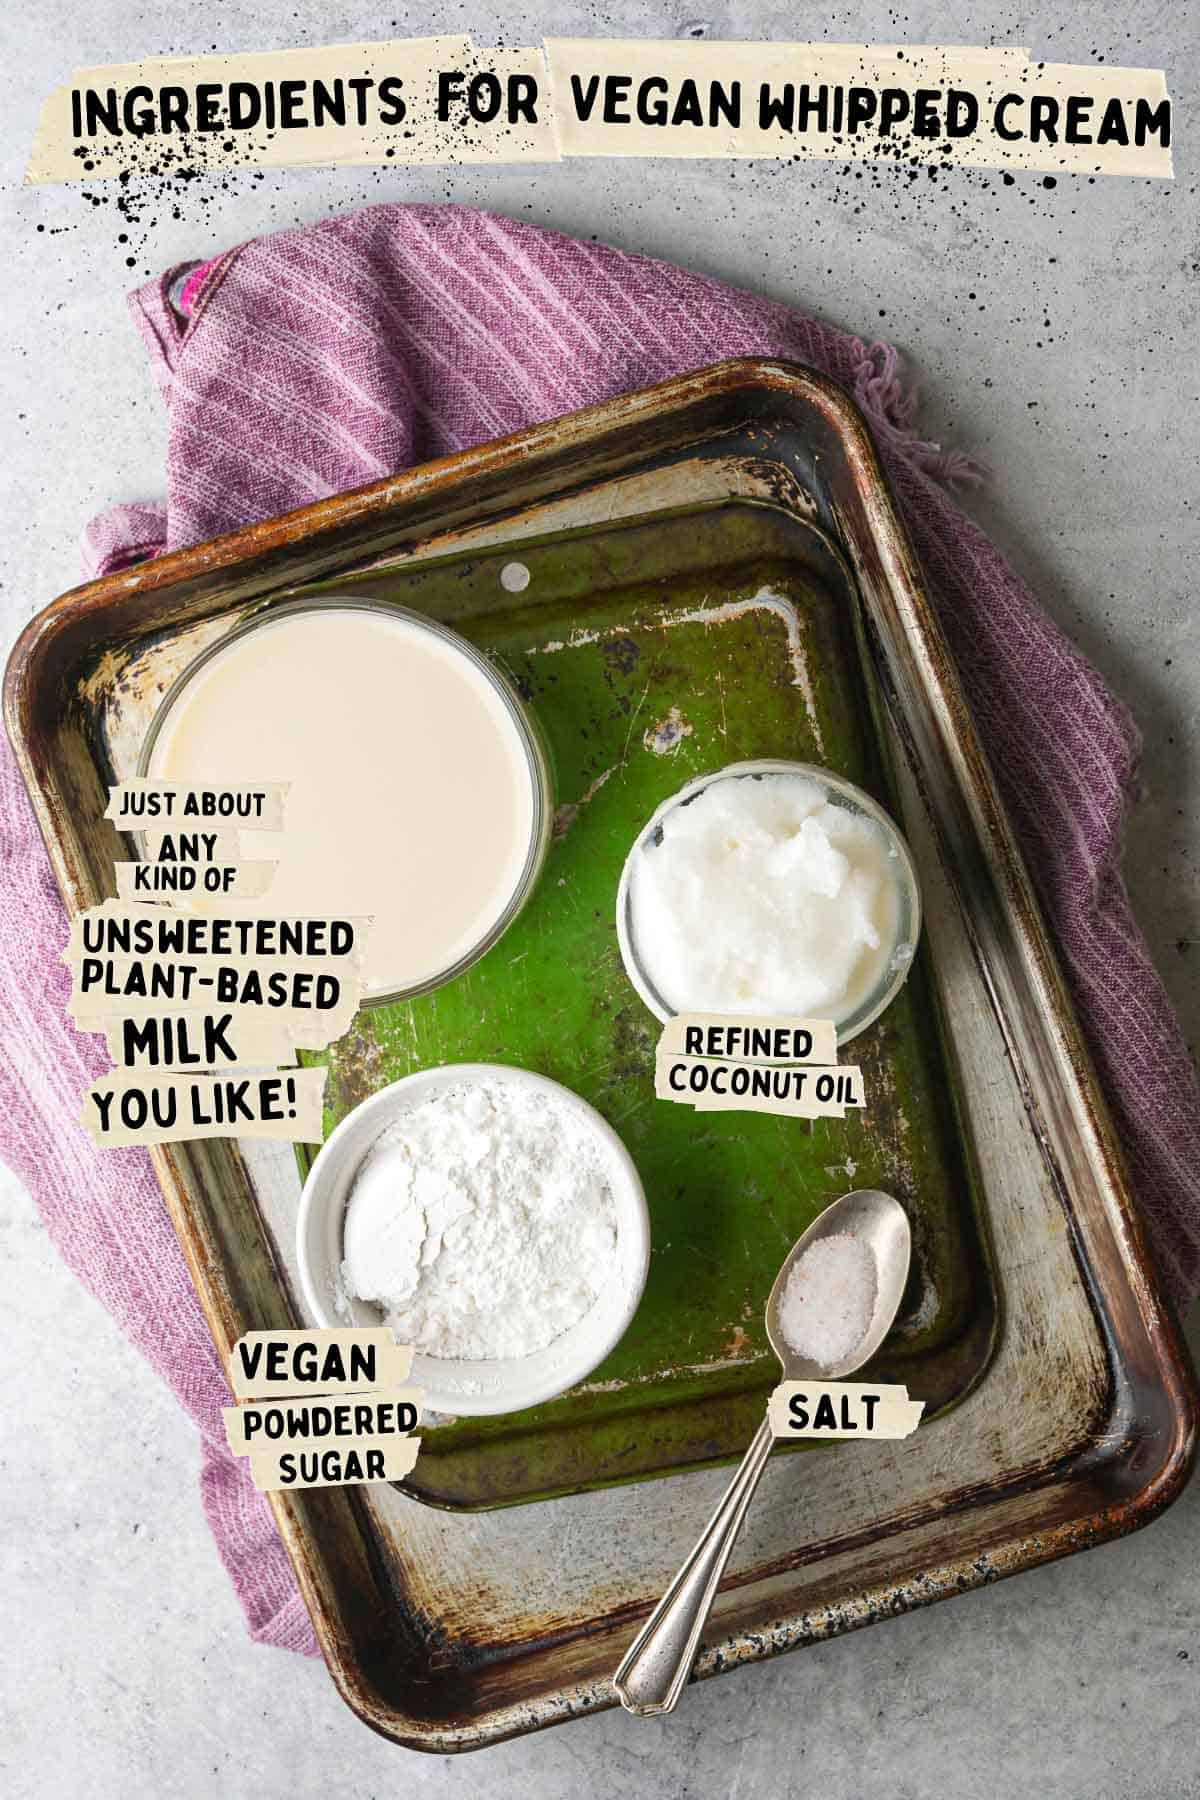 Ingredients for vegan whipped cream on a metal tray.